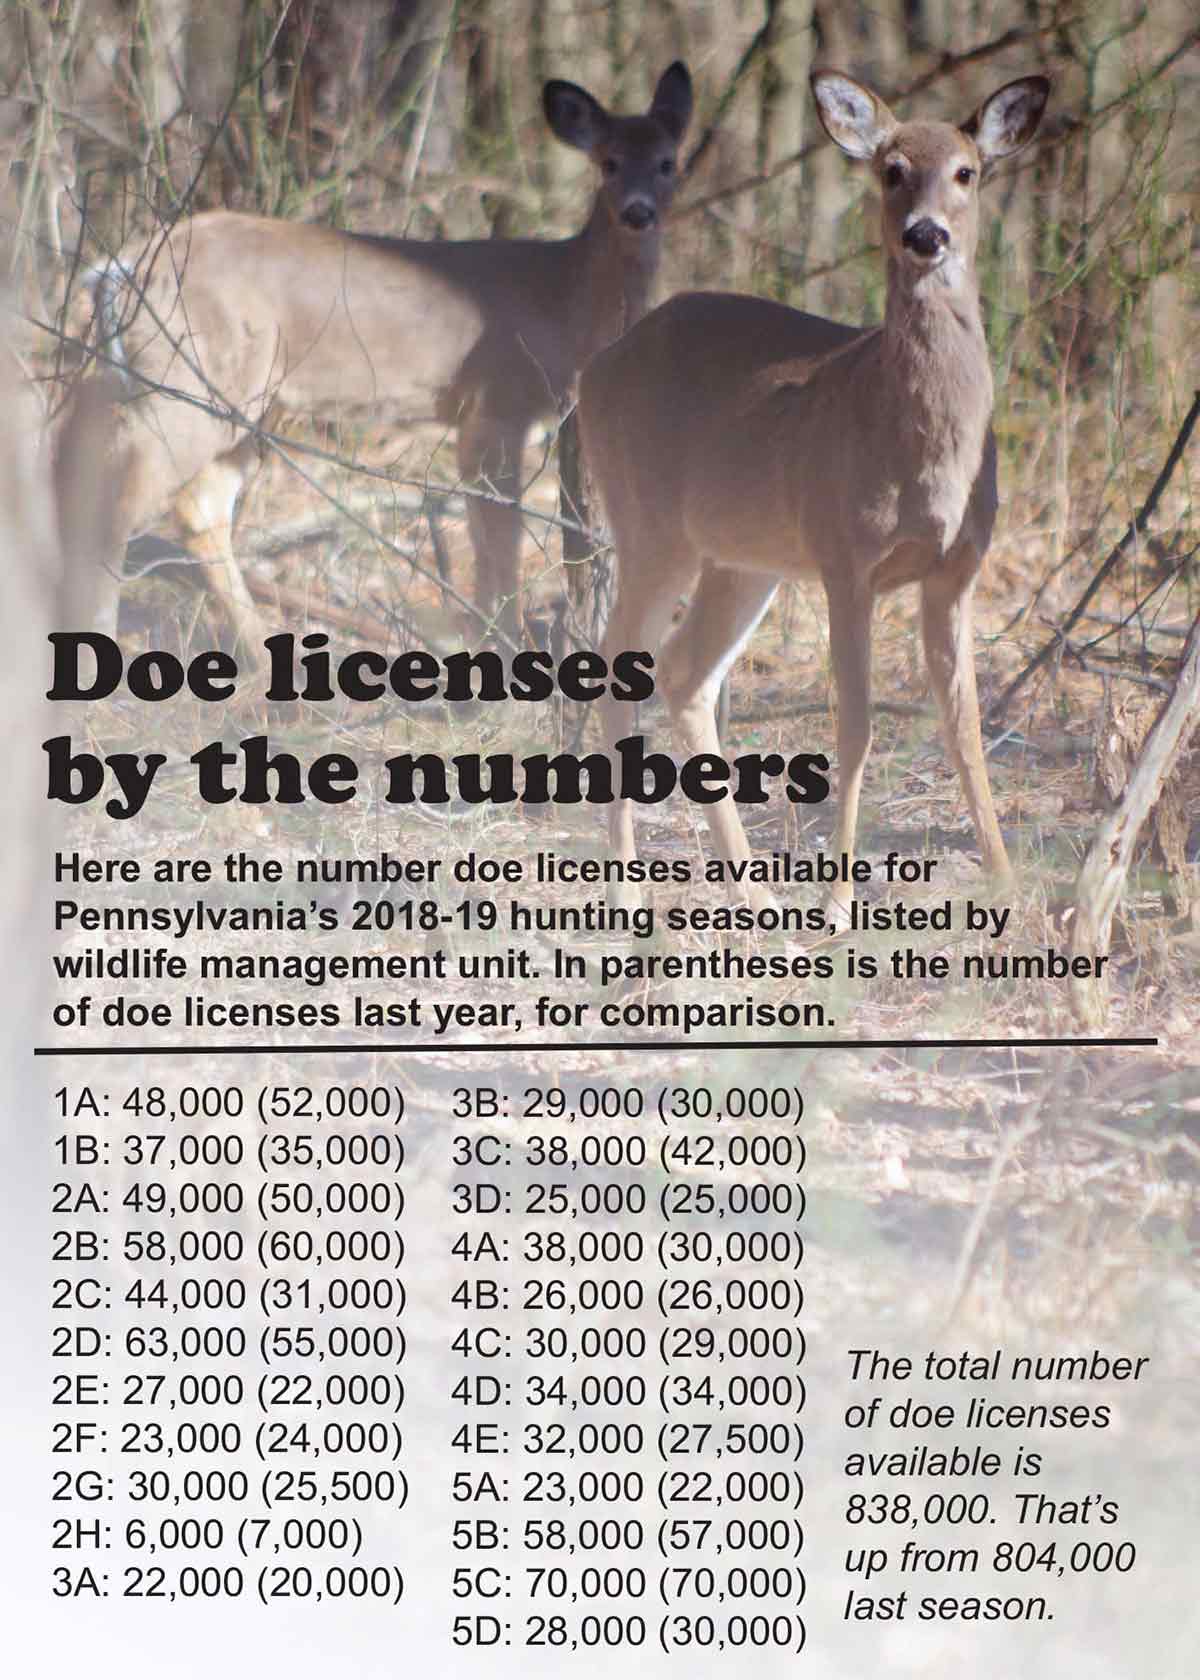 Doe licenses are more numerous now than last year.